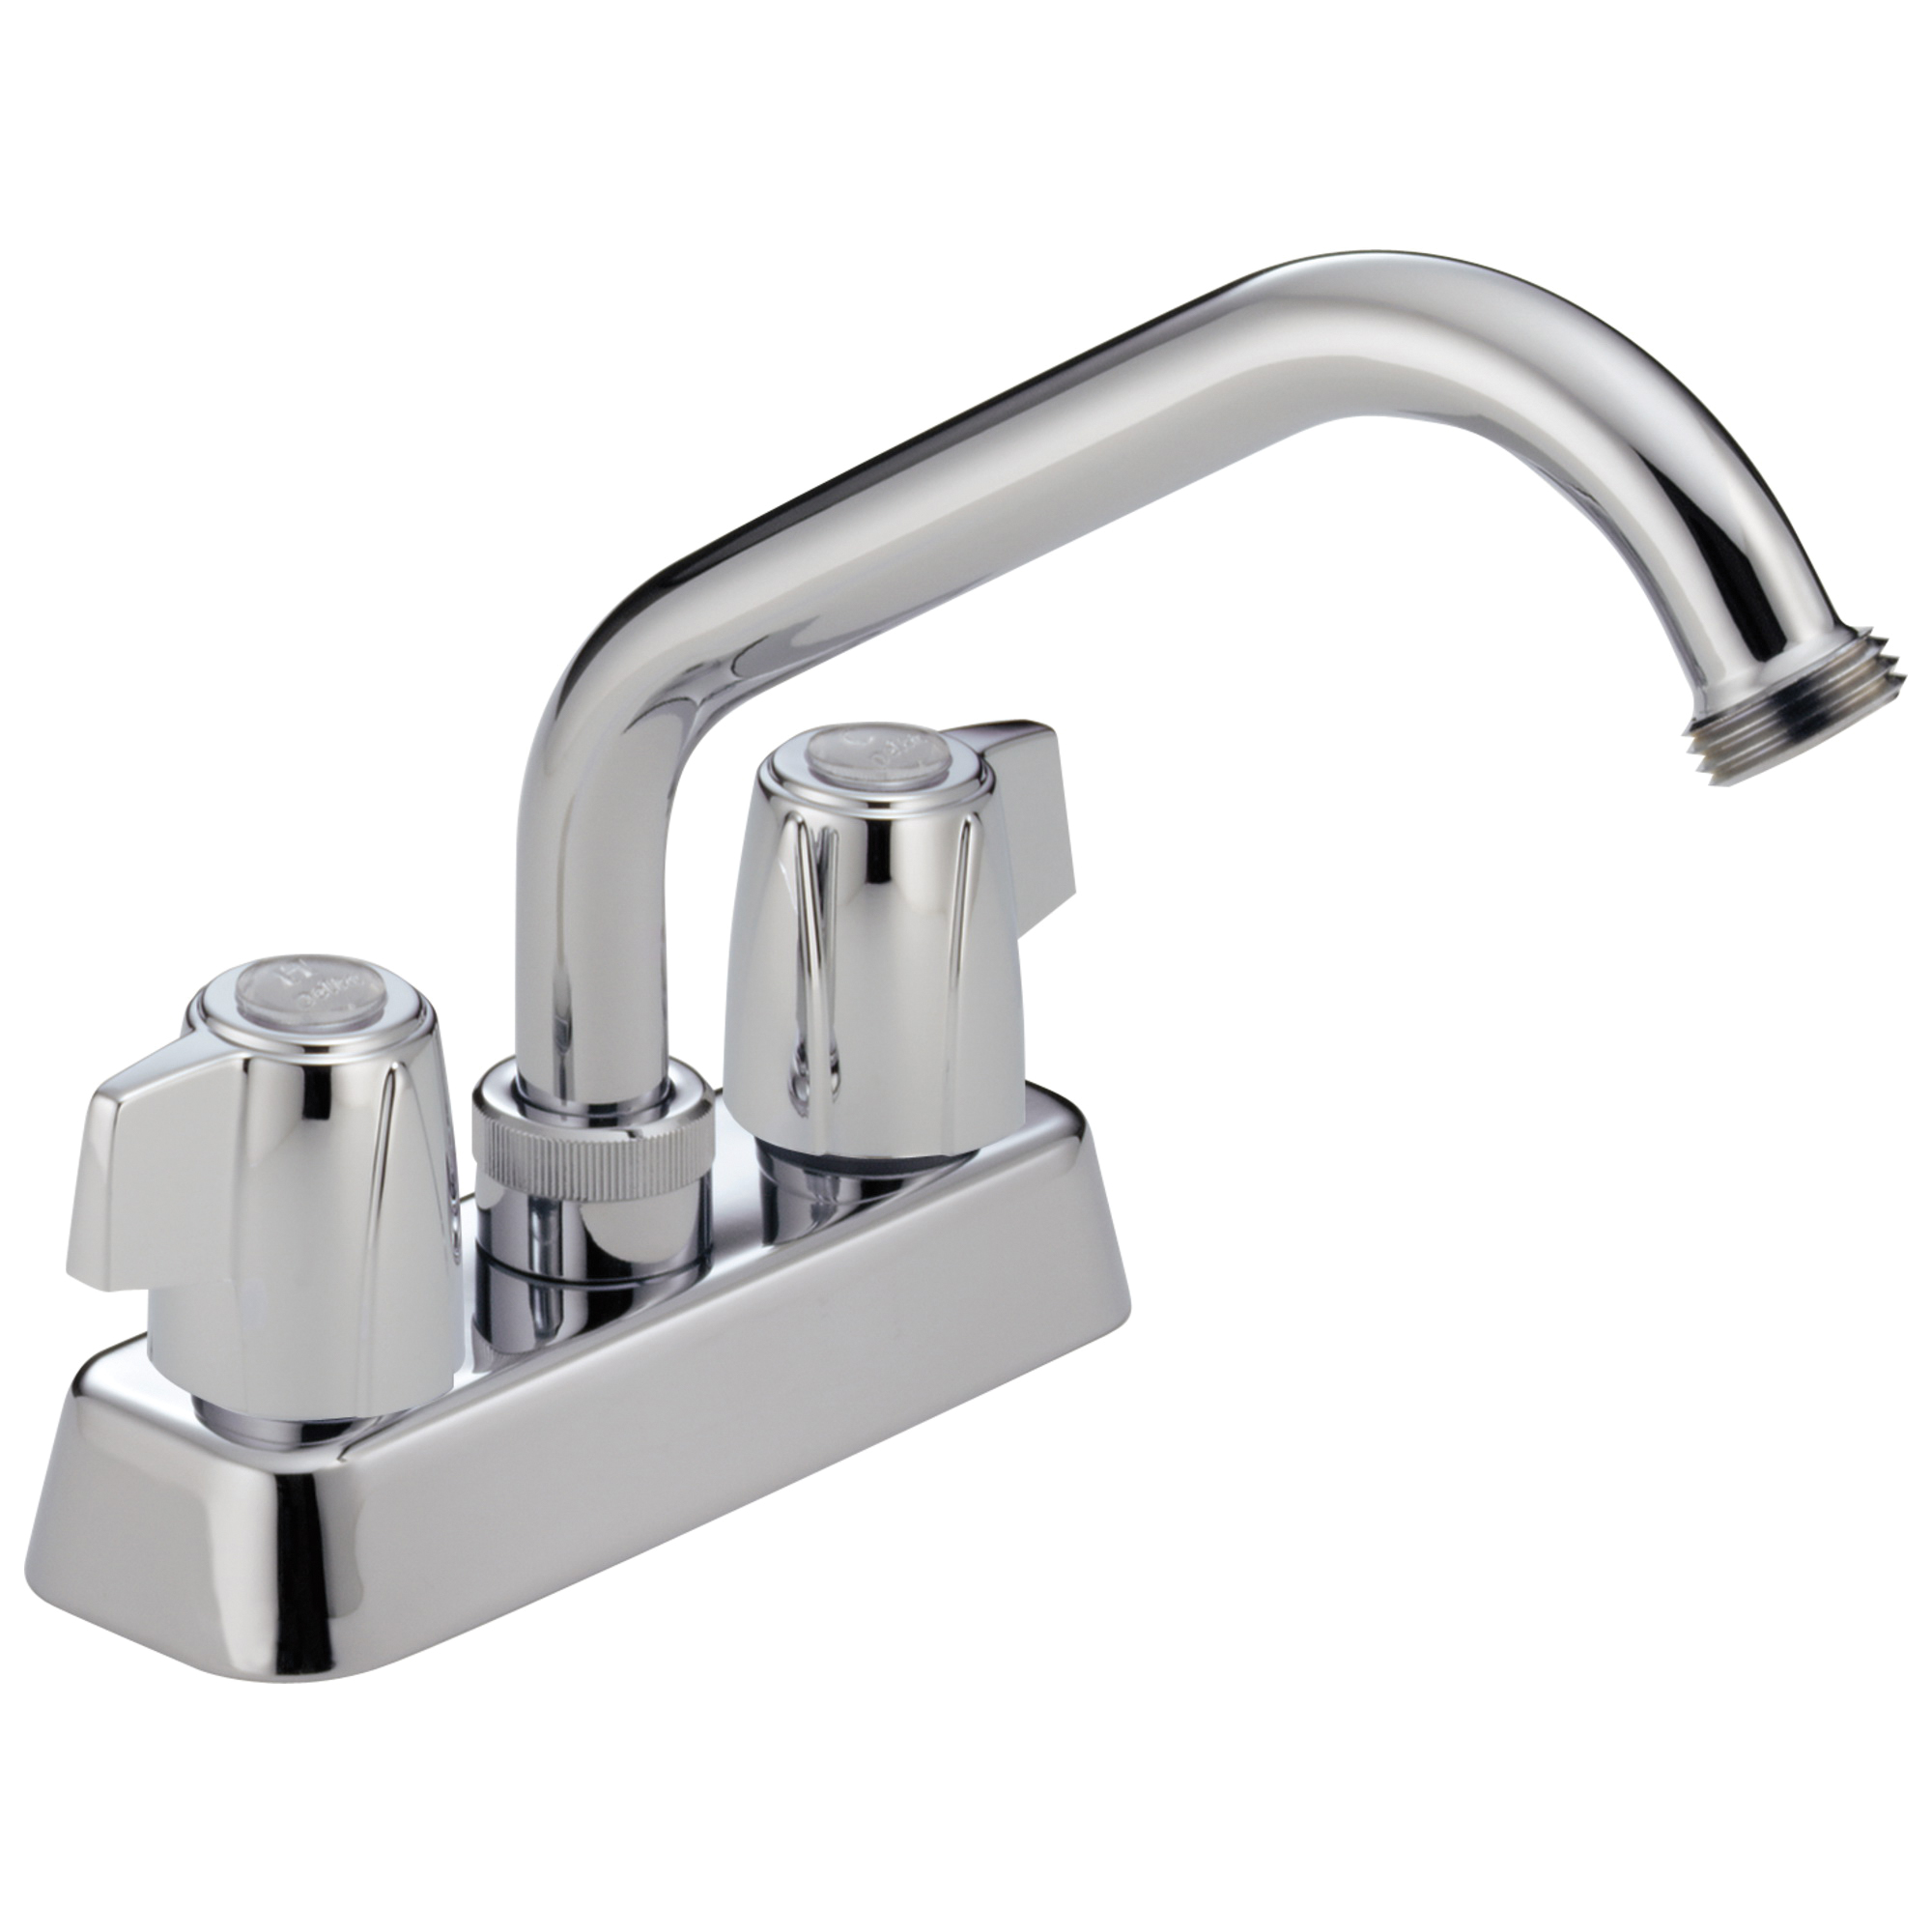 Peerless® P299232 Laundry Faucet, 1.5 gpm Flow Rate, 4 in Center, Polished Chrome, 2 Handles, Import